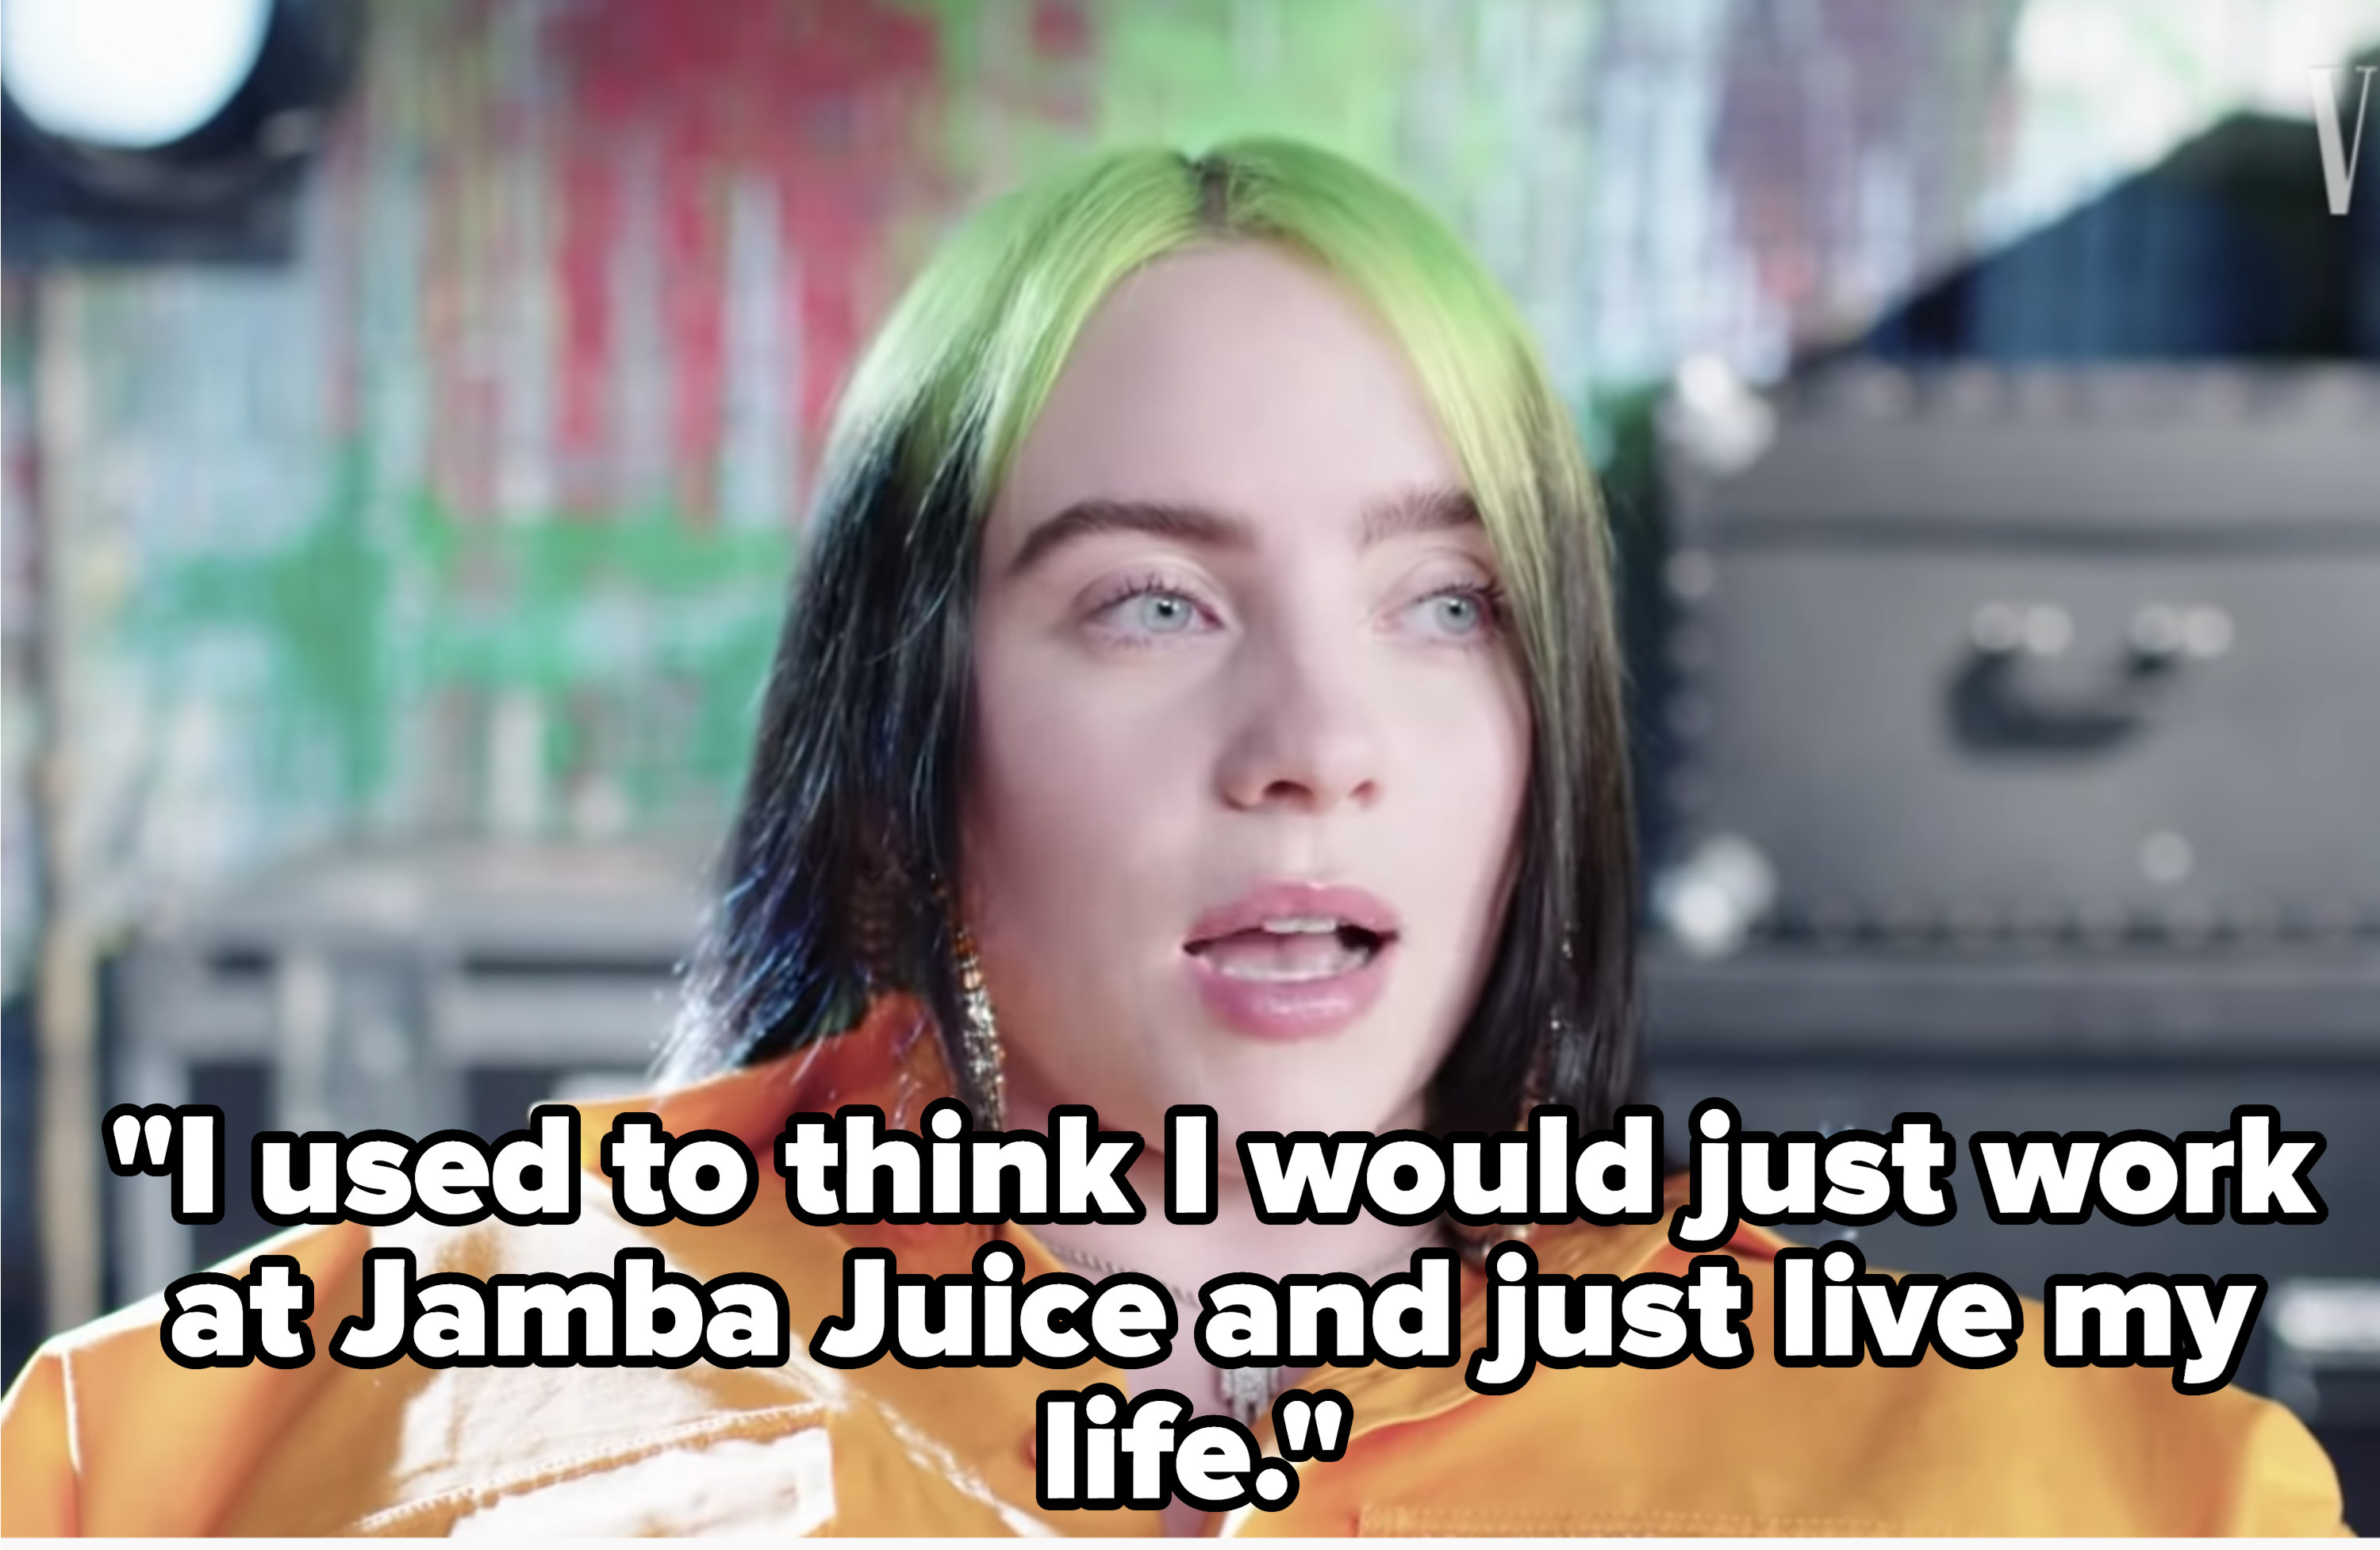 She said &quot;I used to think I would just work at Jamba Juice and just live my life&quot;